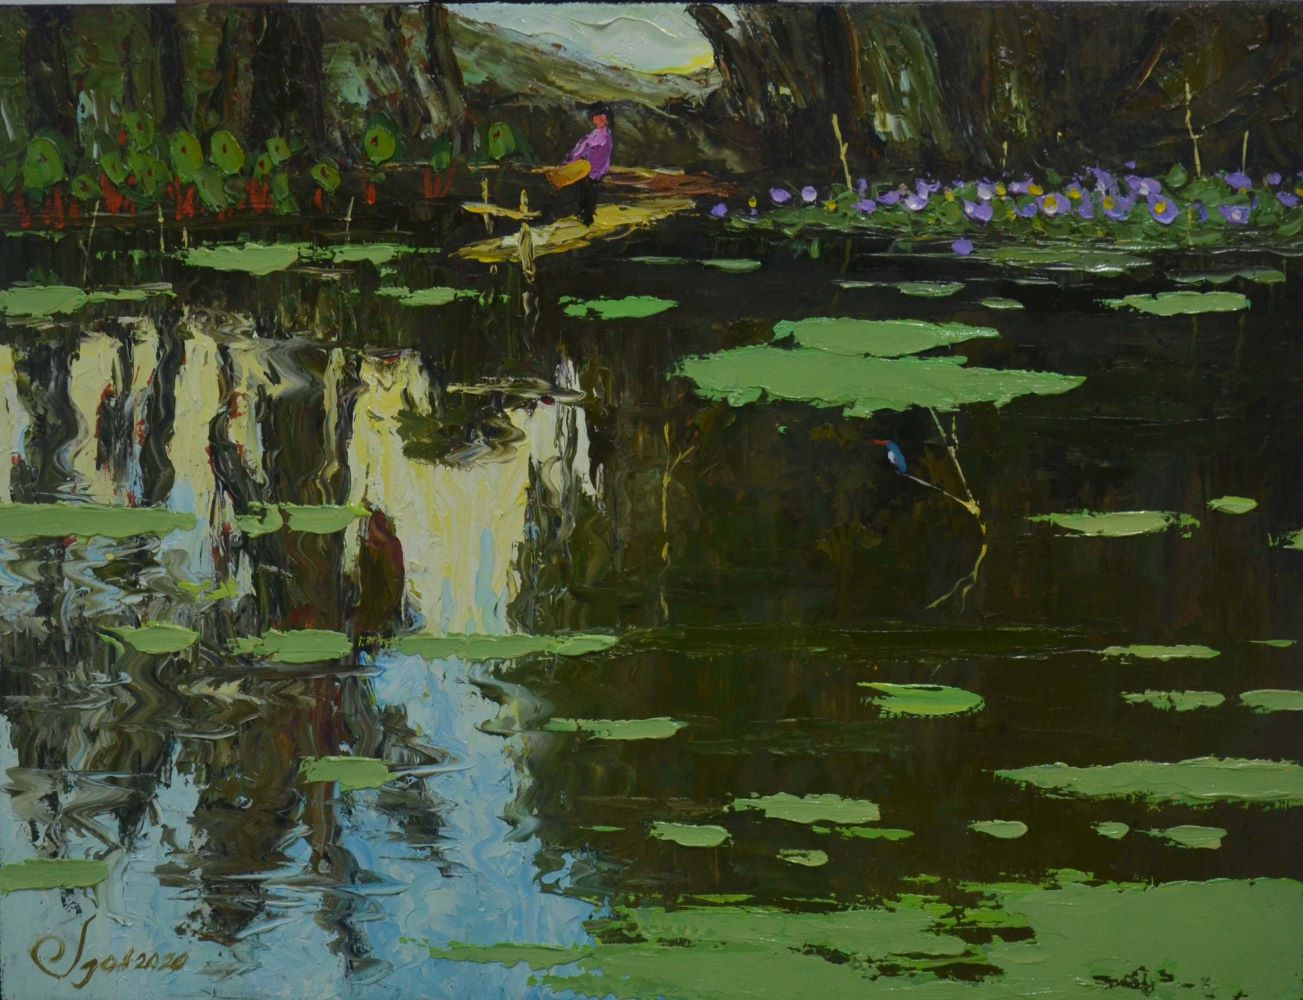 By the Pond's Shore II - Vietnamese Oil Painting Landscape by Artist Dang Dinh Ngo